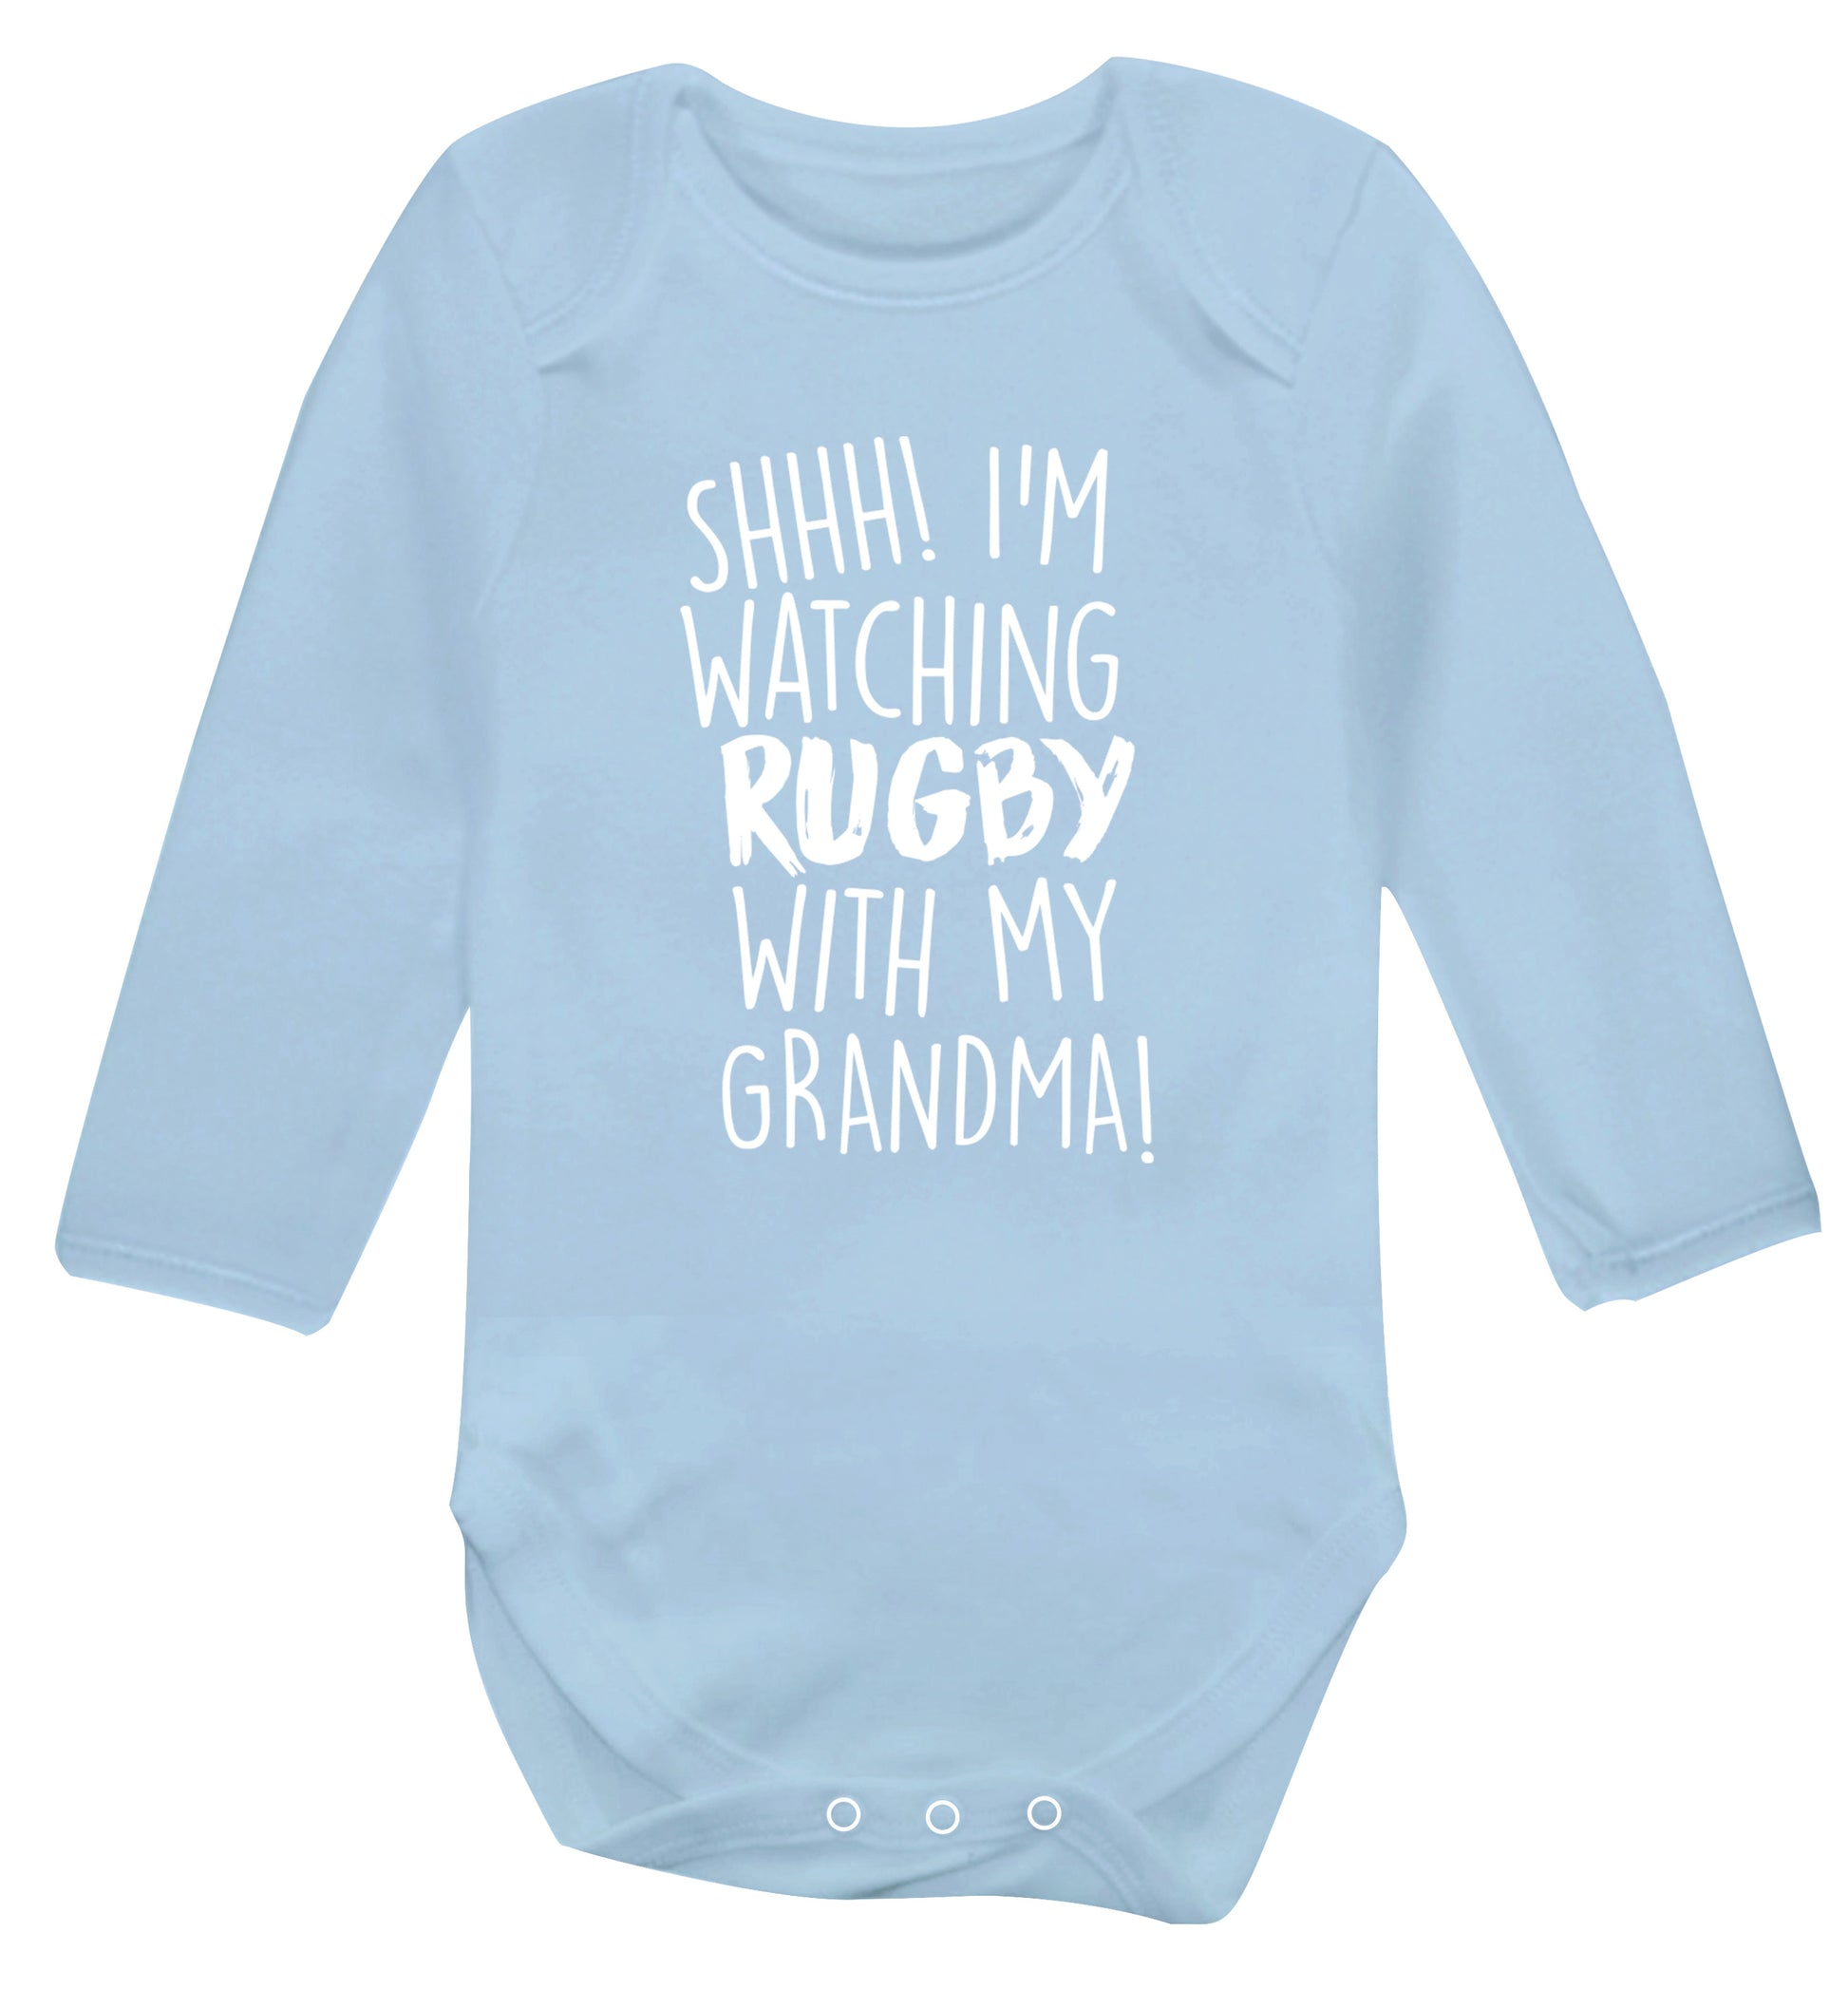 Shh I'm watching rugby with my grandma Baby Vest long sleeved pale blue 6-12 months